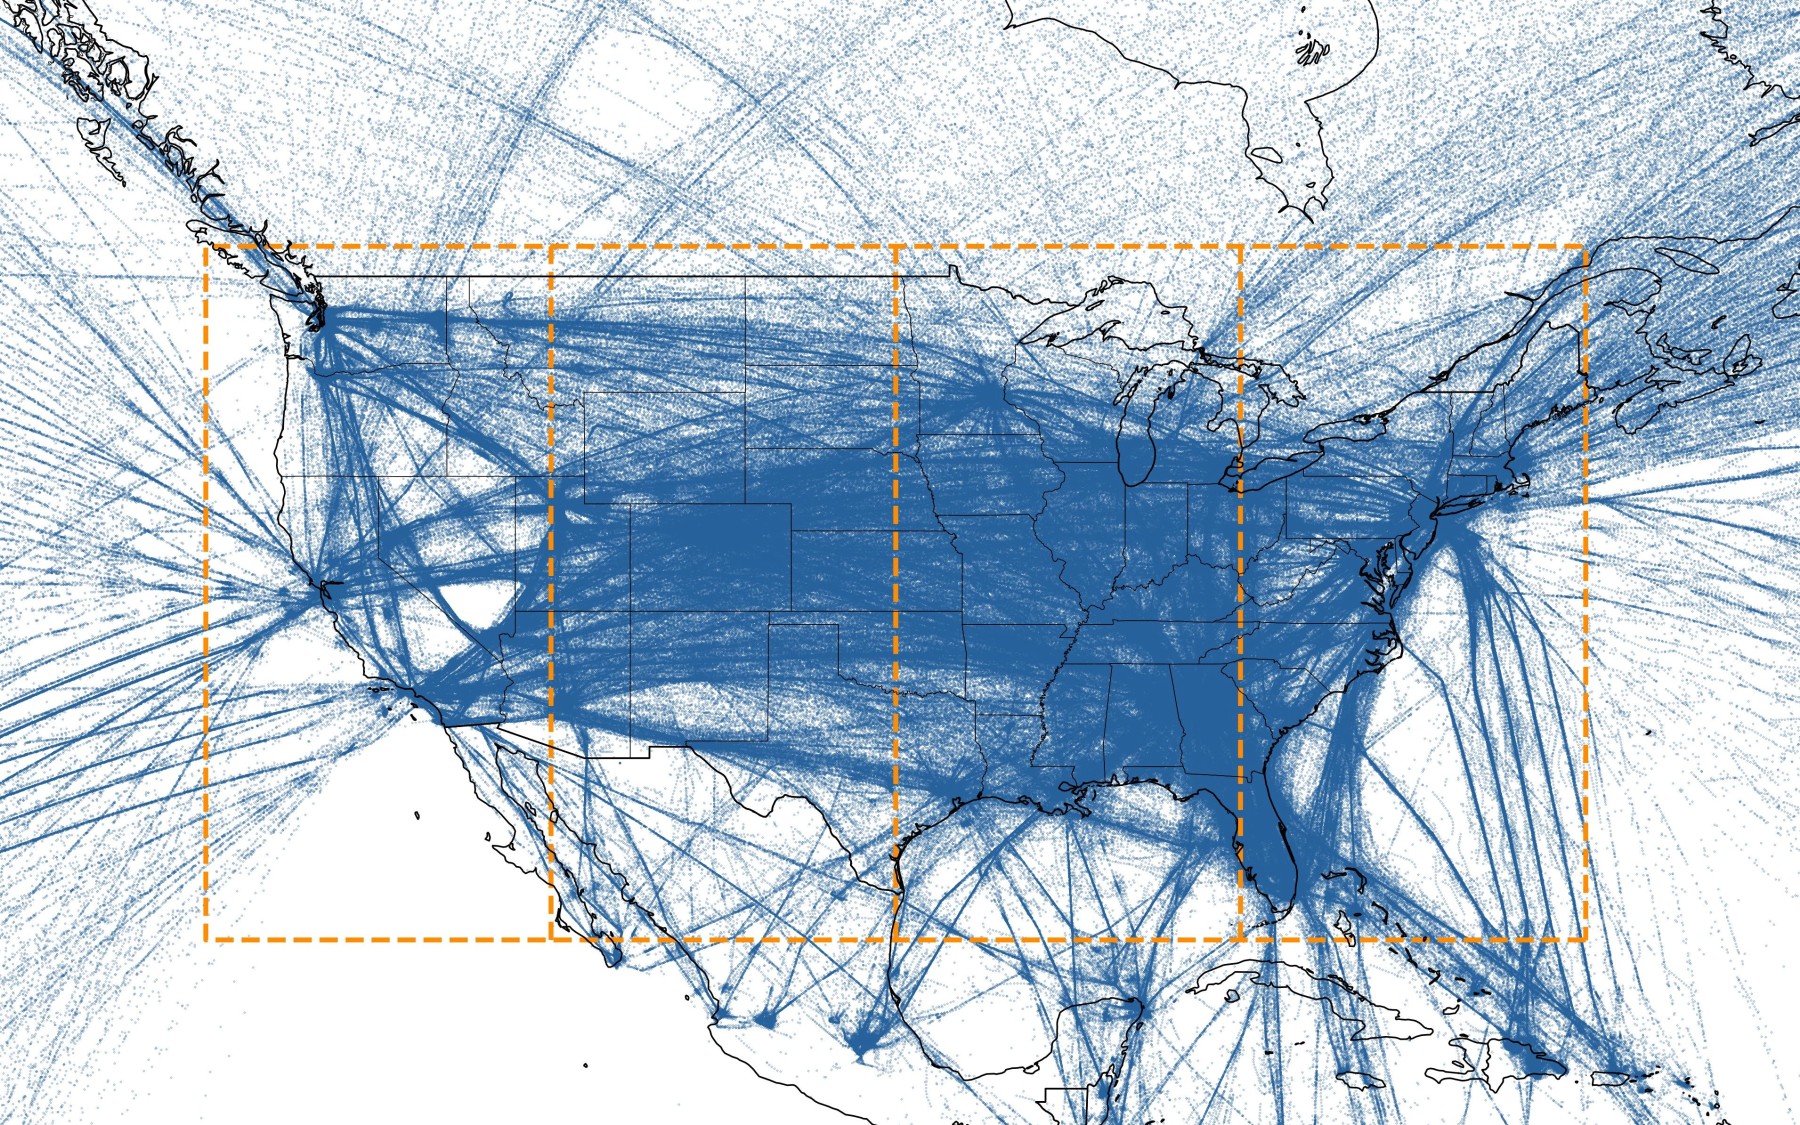 amdar turbulence measurements in 2021 over the united states